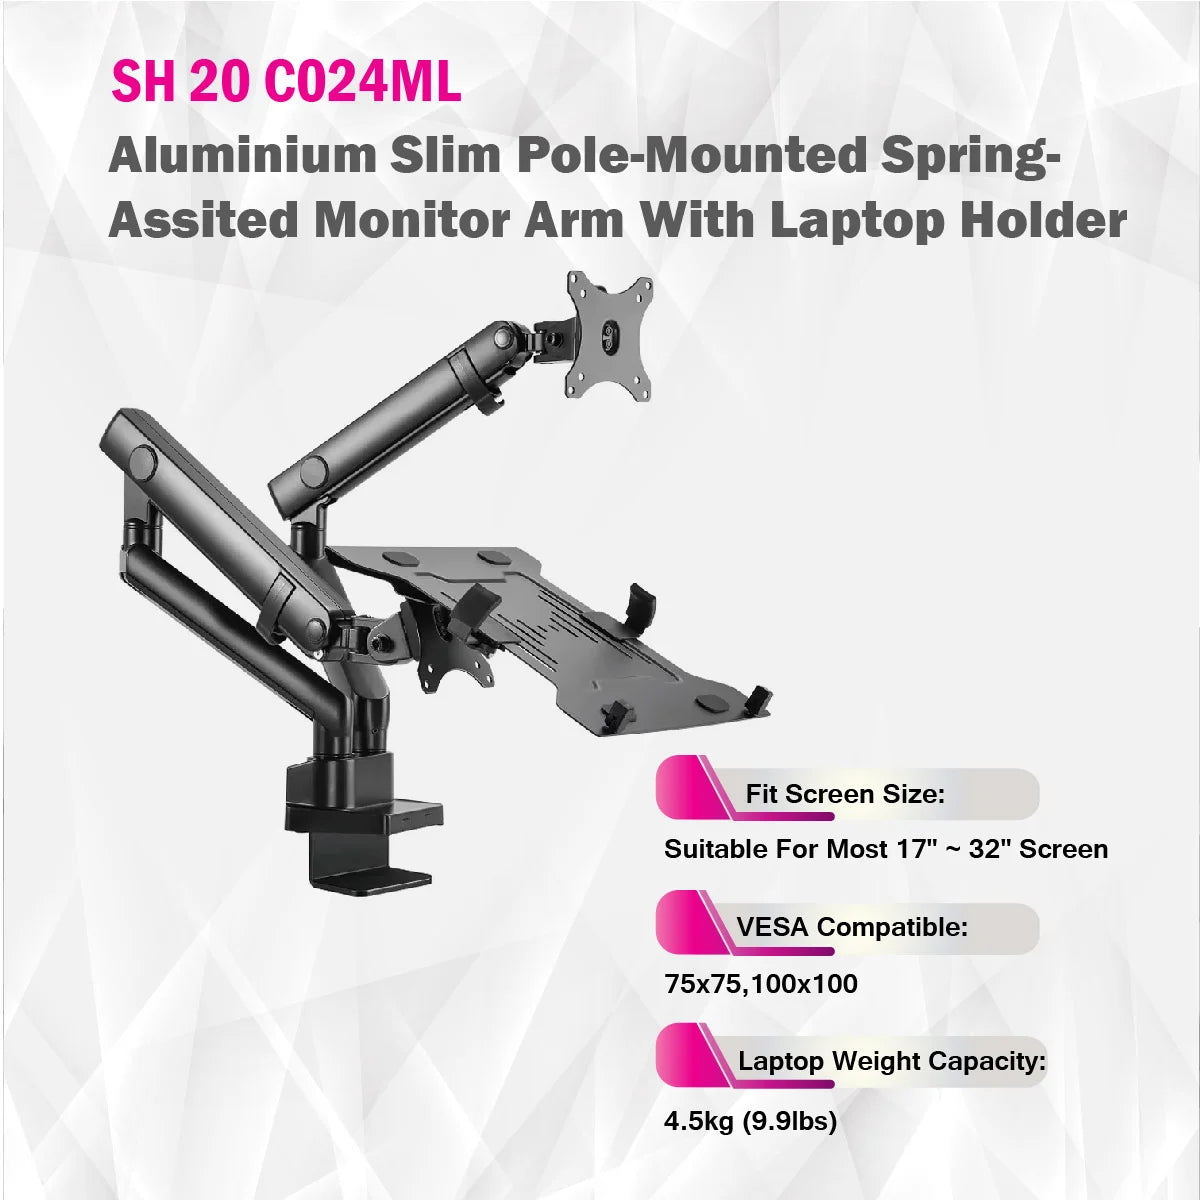 Skill Tech SH20 C024ML | Aluminium Slim Pole-Mounted Spring-Assisted Monitor Arm With Laptop Holder